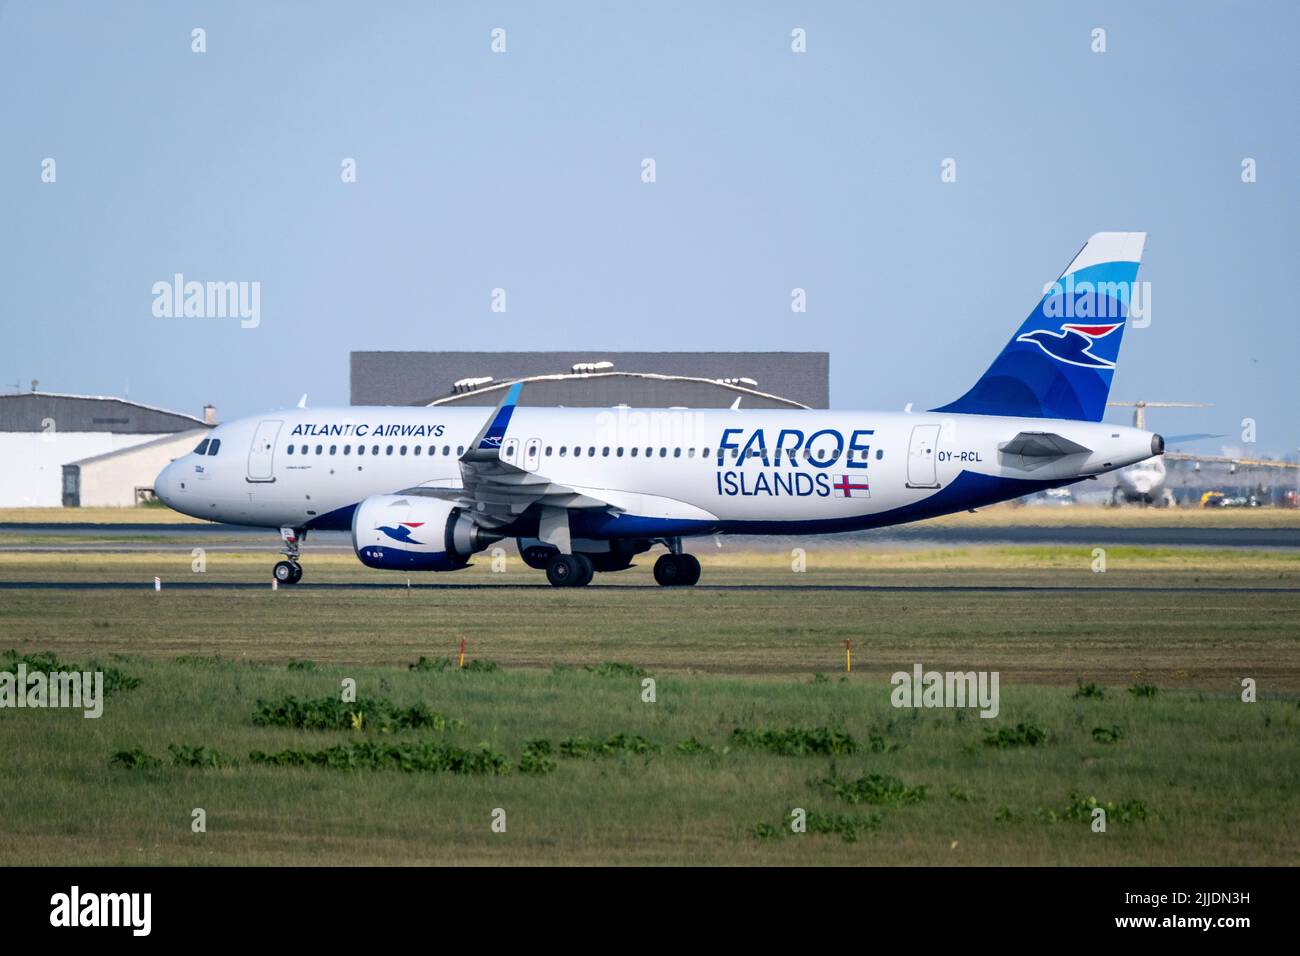 Copenhagen / DENMARK - JULY 22, 2022: Airbus A320, operated by Atlantic Airways, the flag carrier of Faroe Islands taxiing at Copenhagen airport CPH. Stock Photo